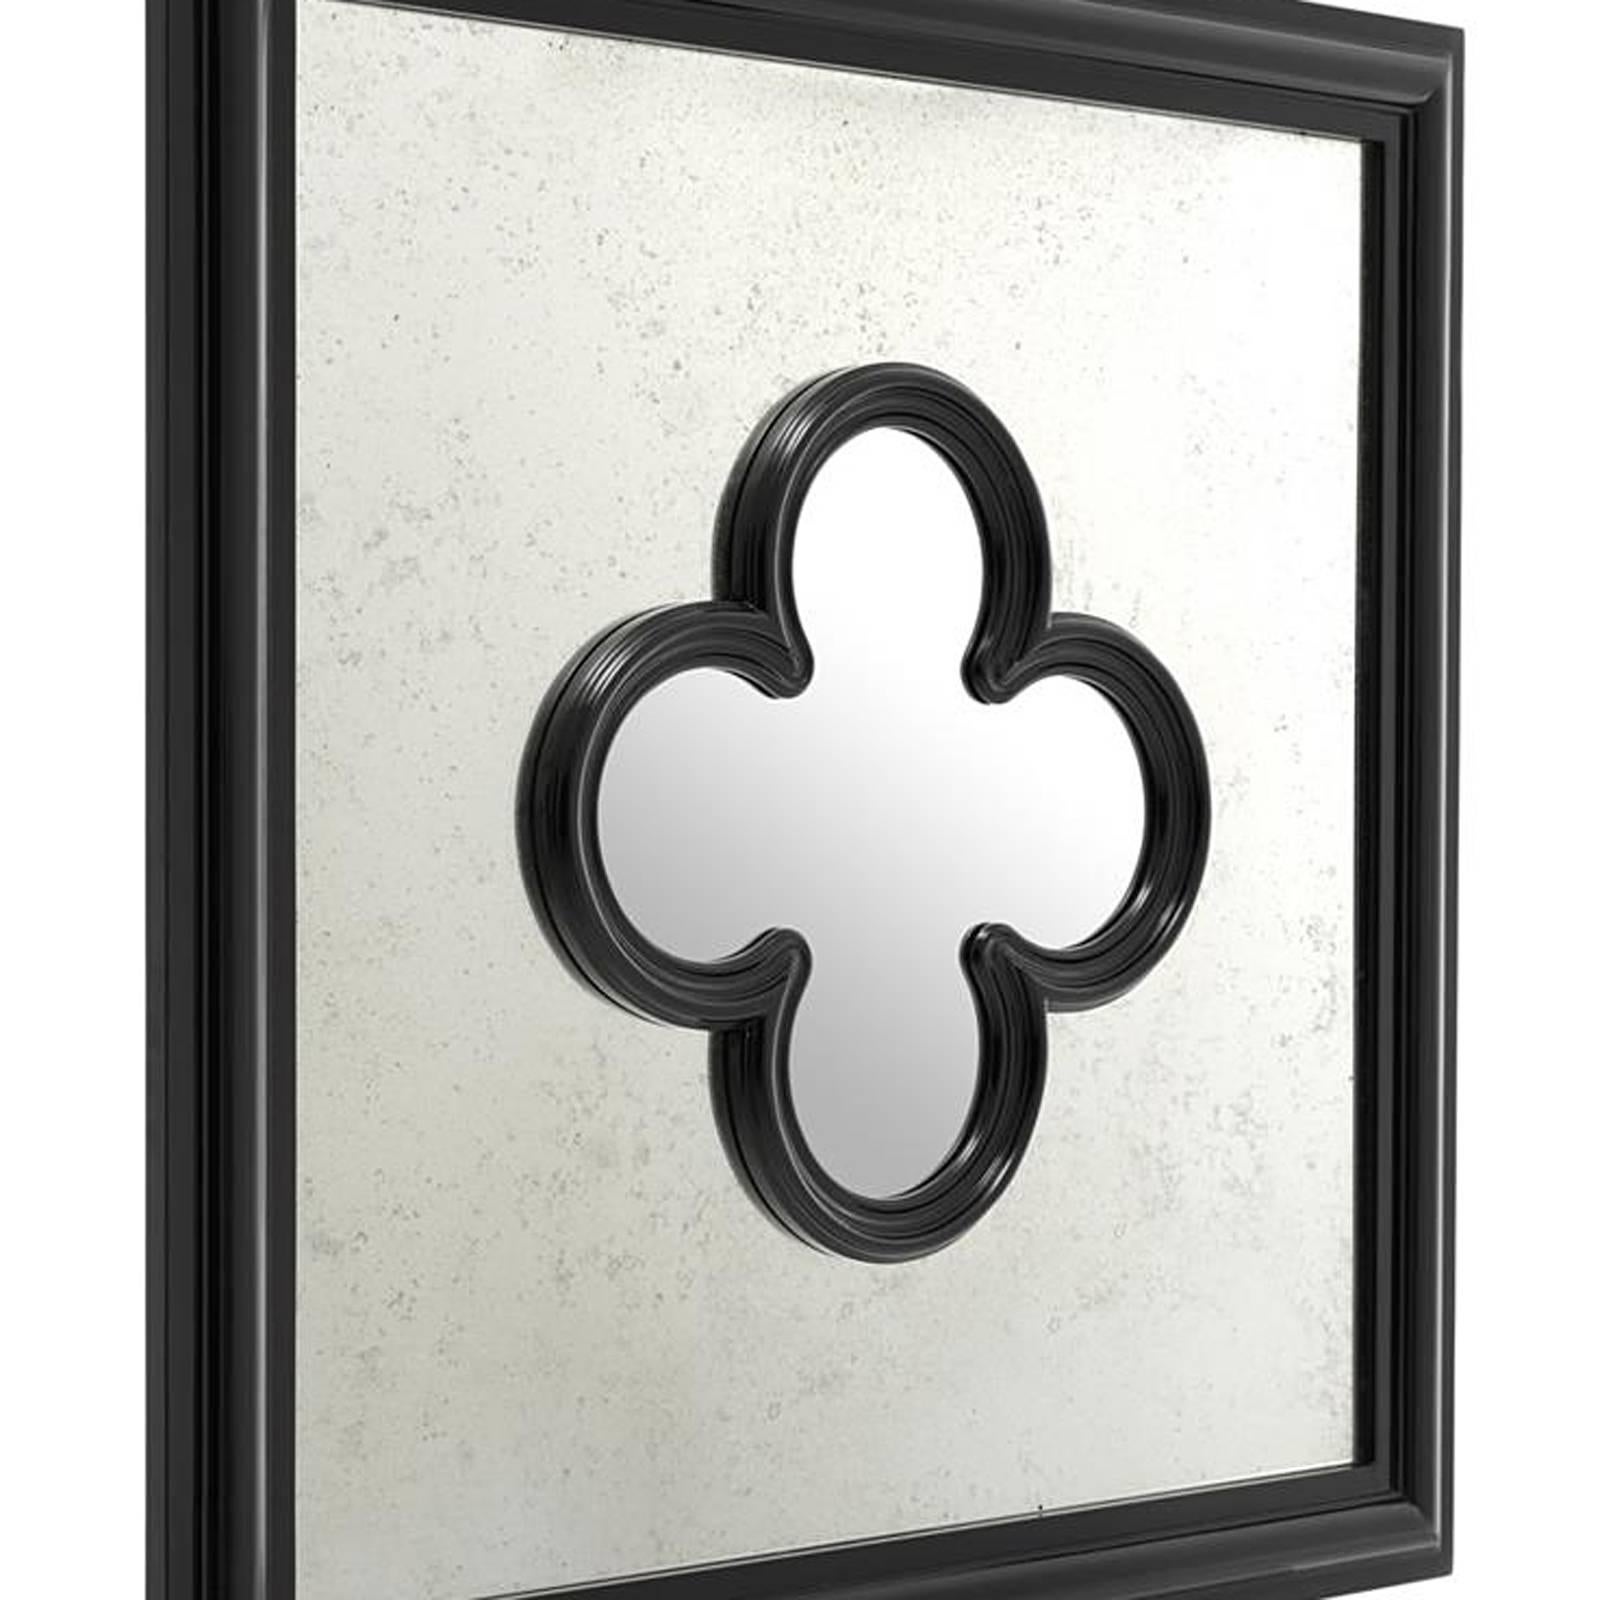 Mirror shamrock with mirror glass in
antique finish. Frame in solid mahogany
wood in black lacquered piano finish.
